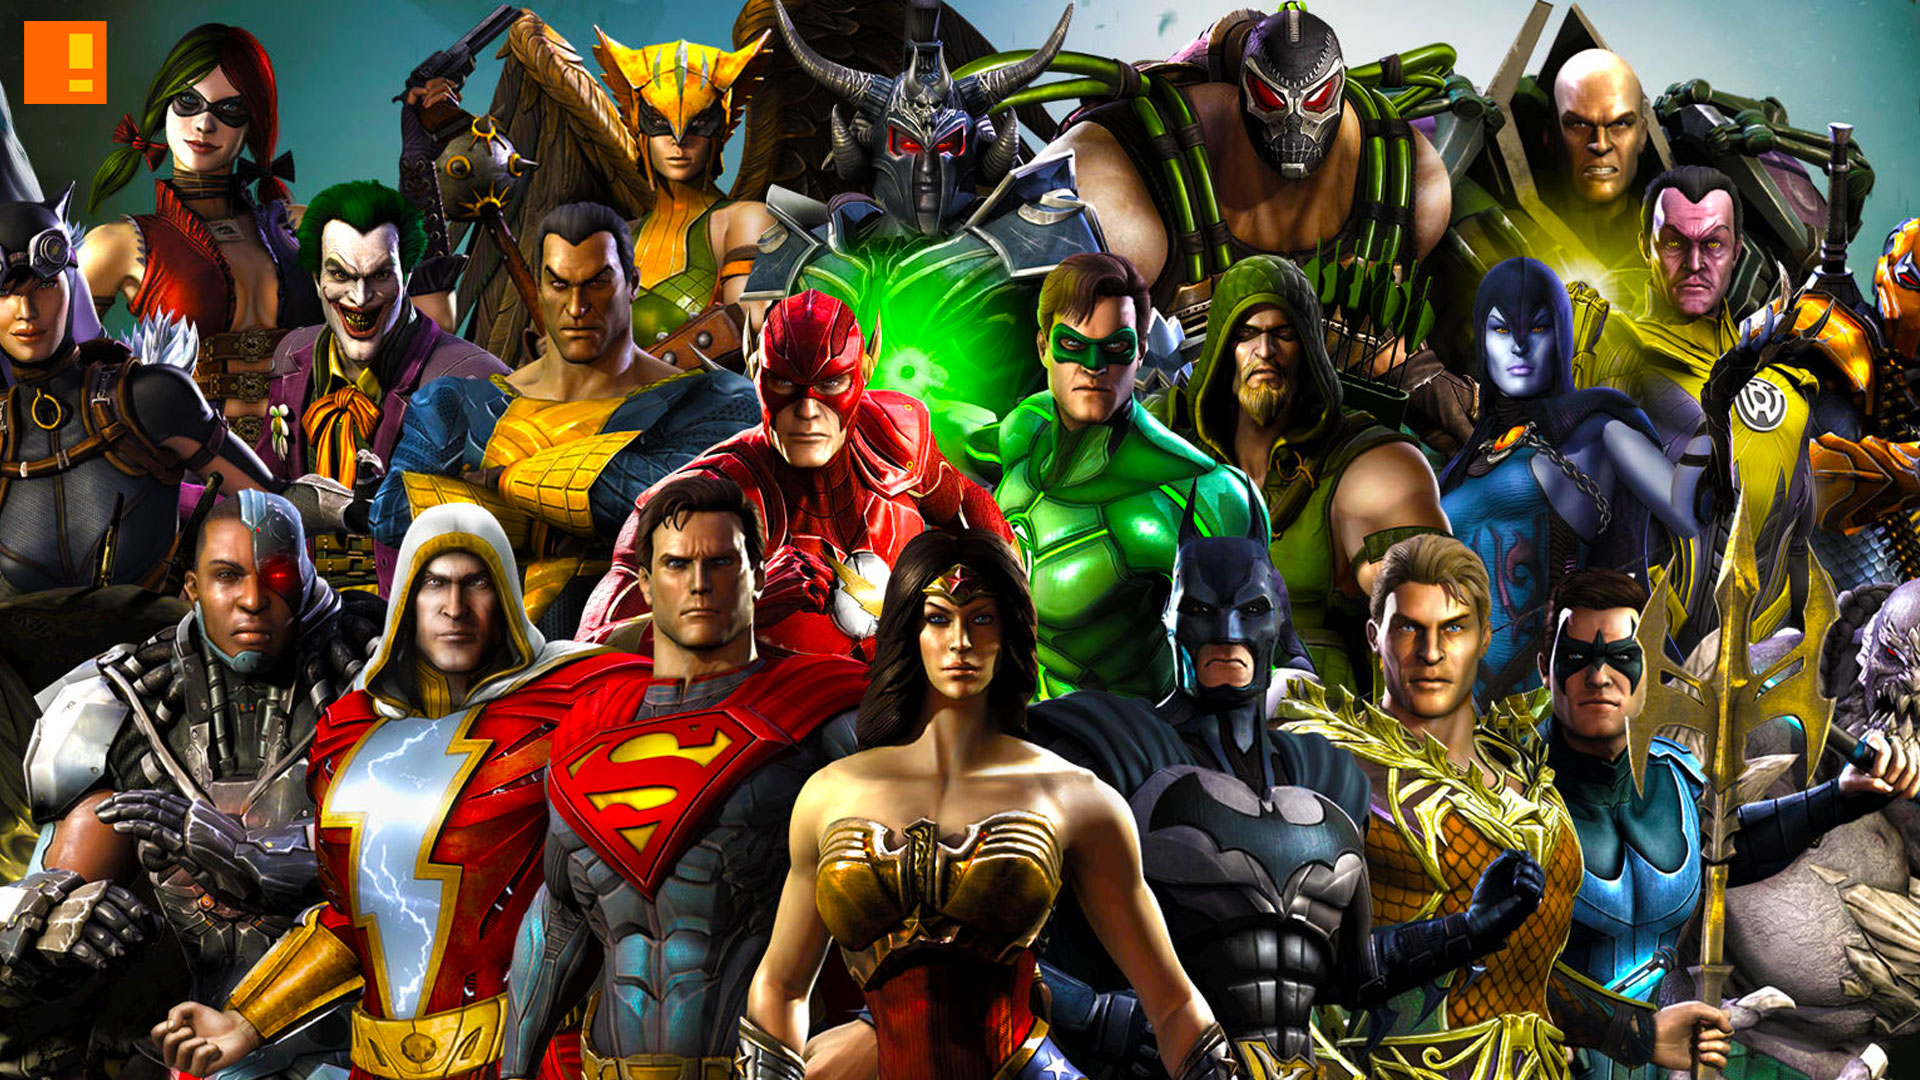 injustice gods among us, the action pixel, injustice, dc comics, dc entertainment, gods among us, injustice: gods amongst us 2, rumor, report, the action pixel, entertainment on tap,